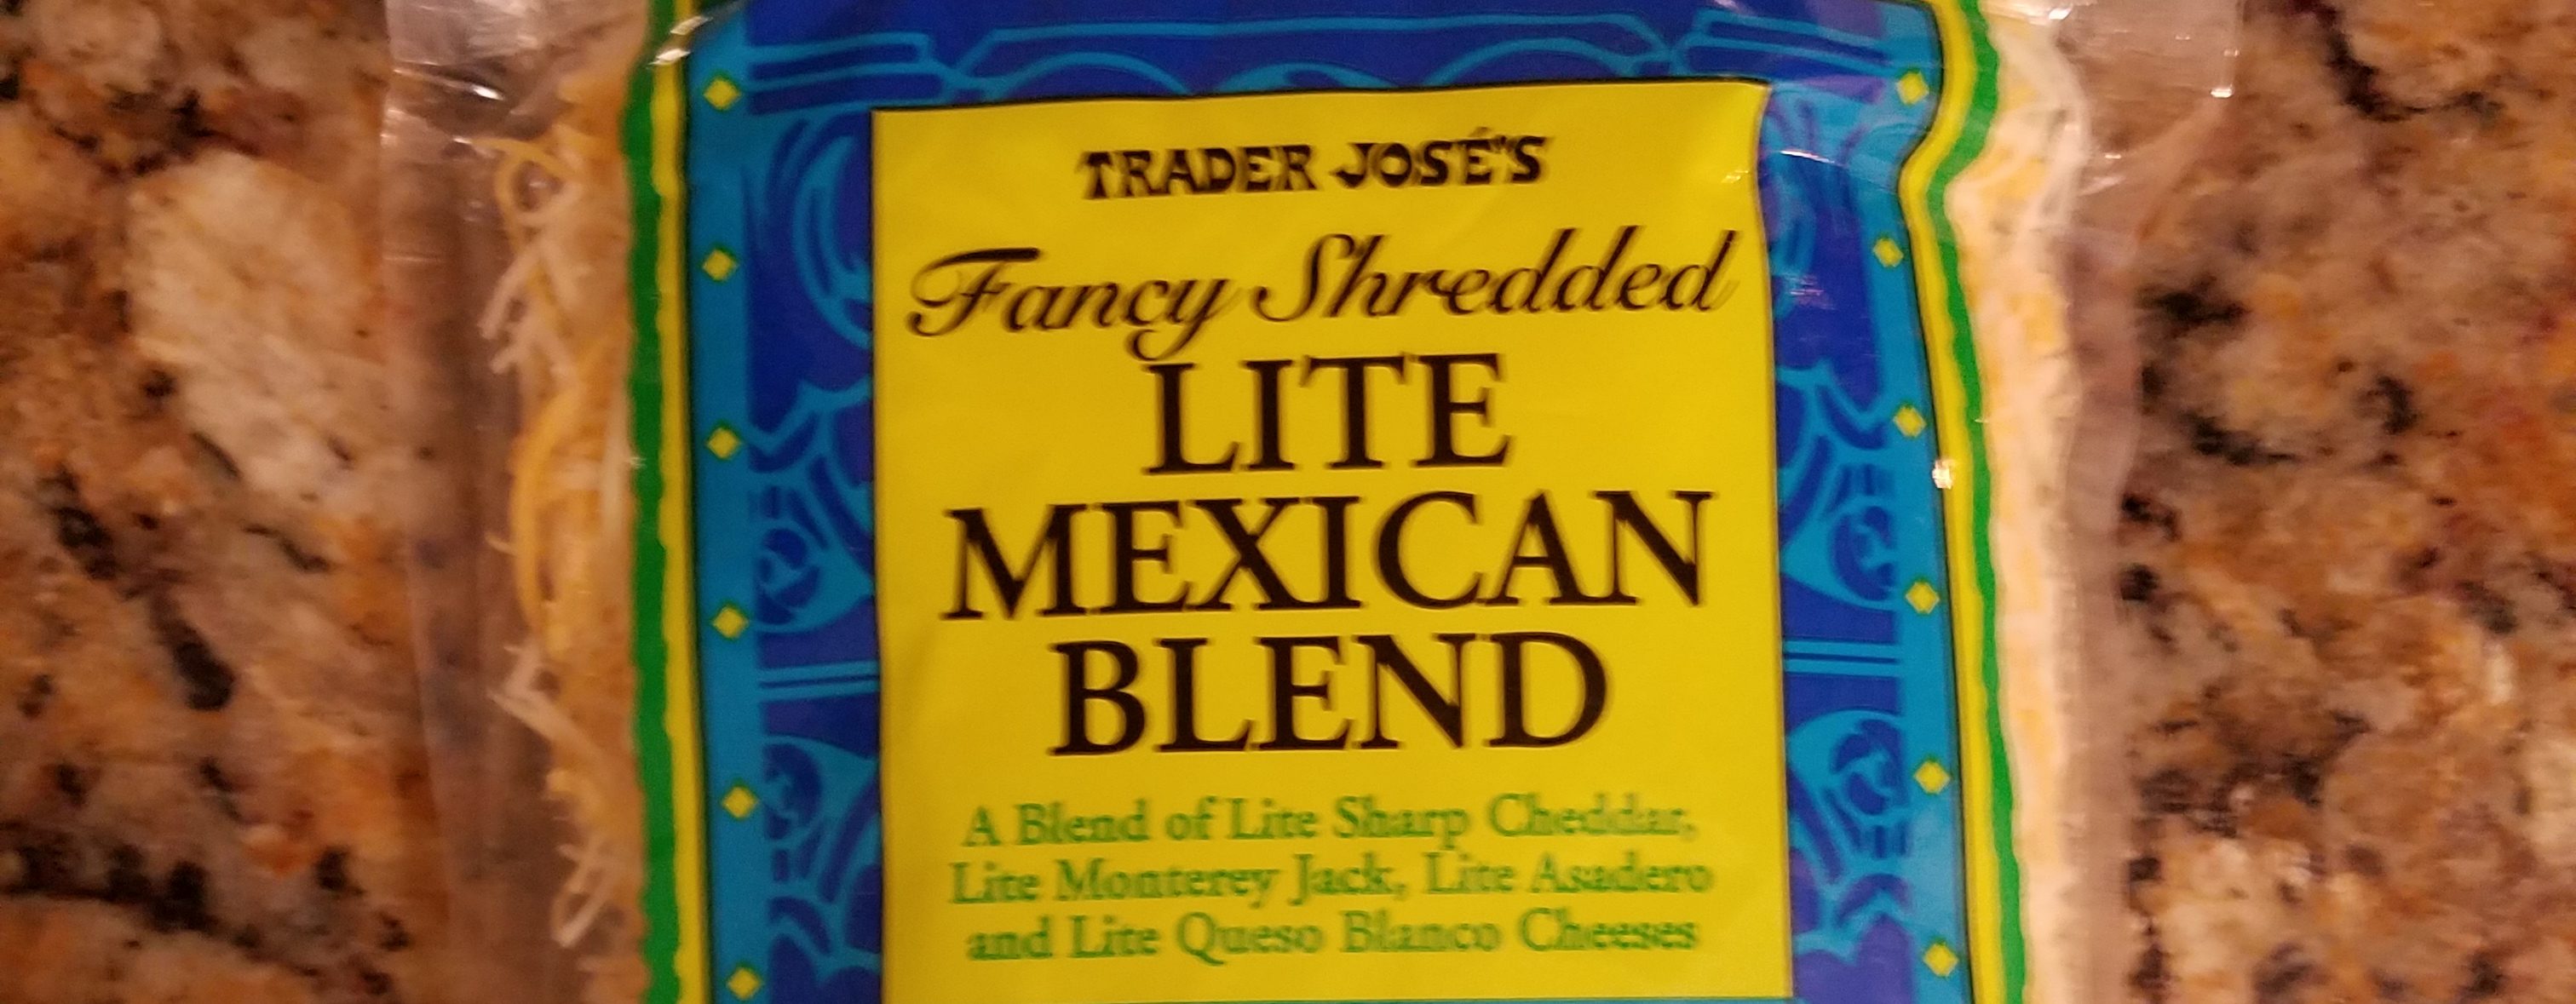 Mexican Cheese Blend Shredded Lite Trader Joe S Everythingjoes Com,Frozen Chicken Breast Crock Pot Recipes